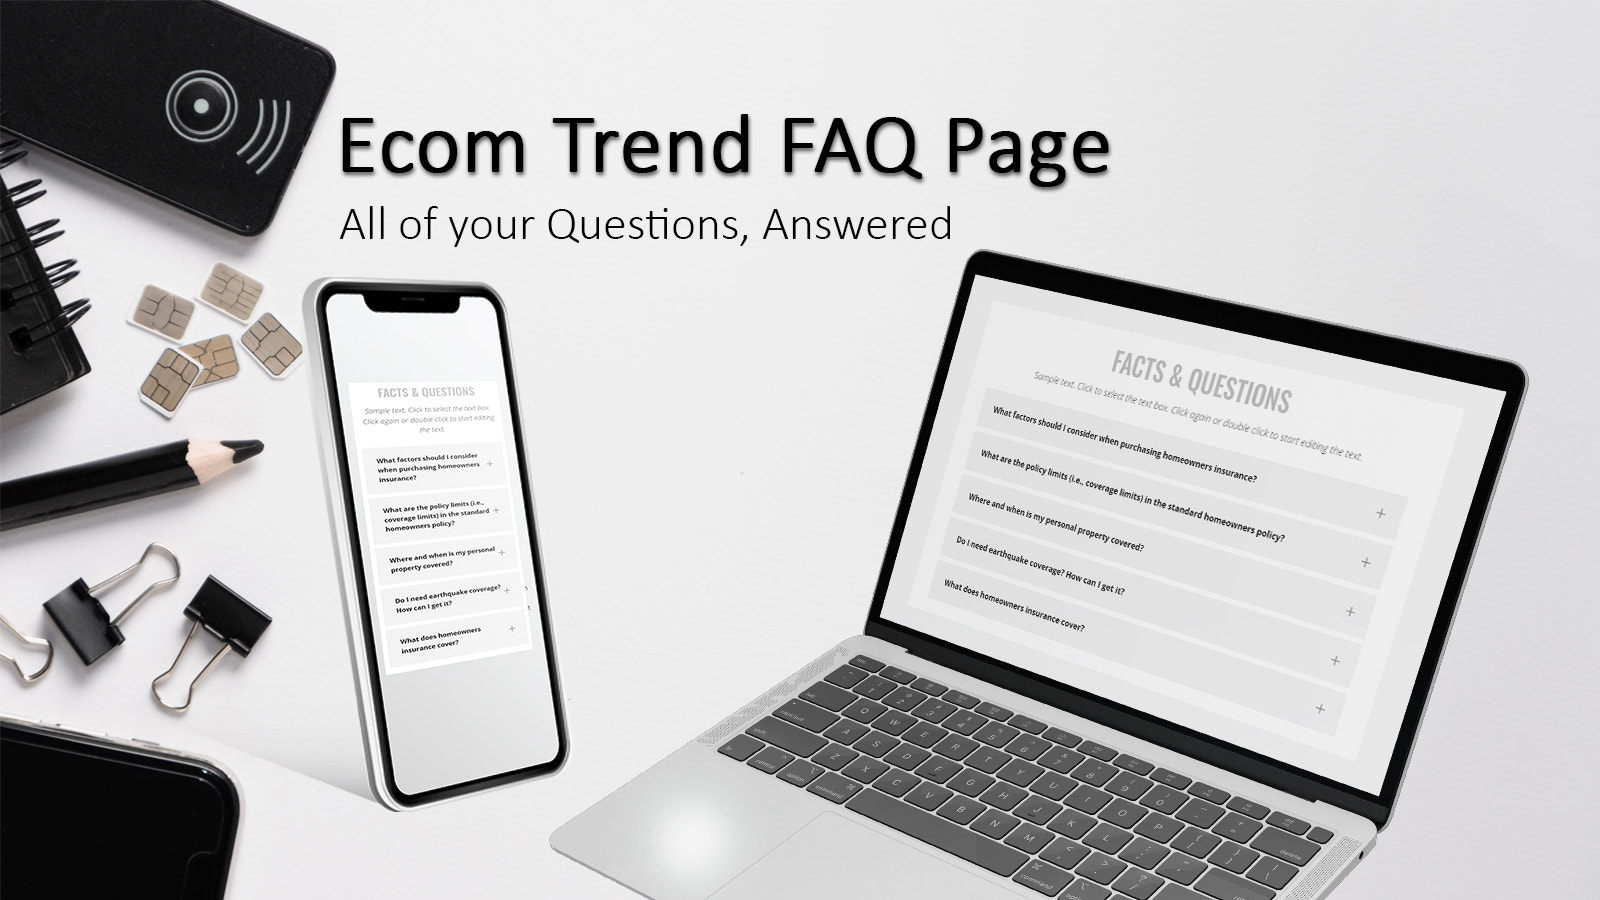 Ecom Trend FAQ Page and accordions - the best in 2023